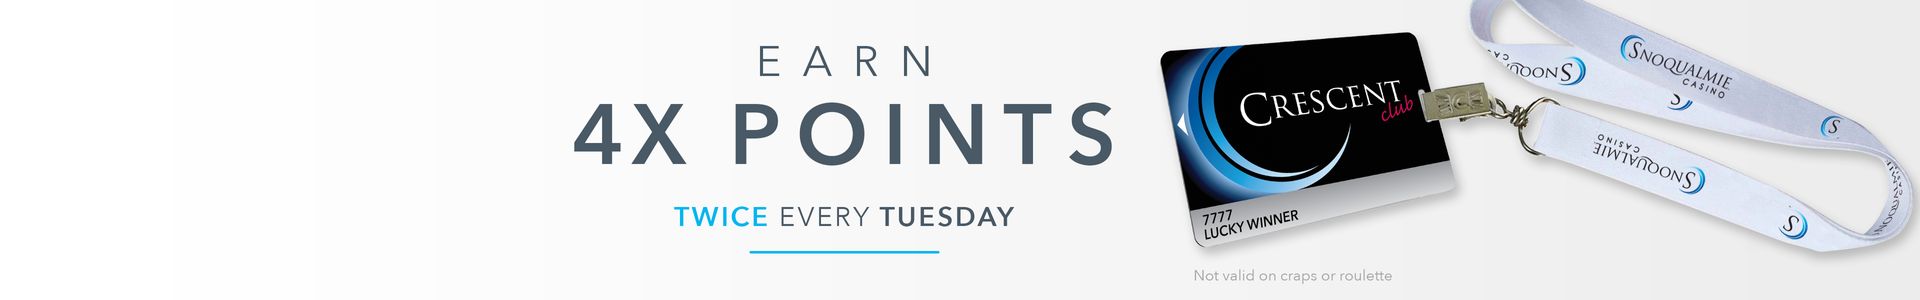 4X Points - February